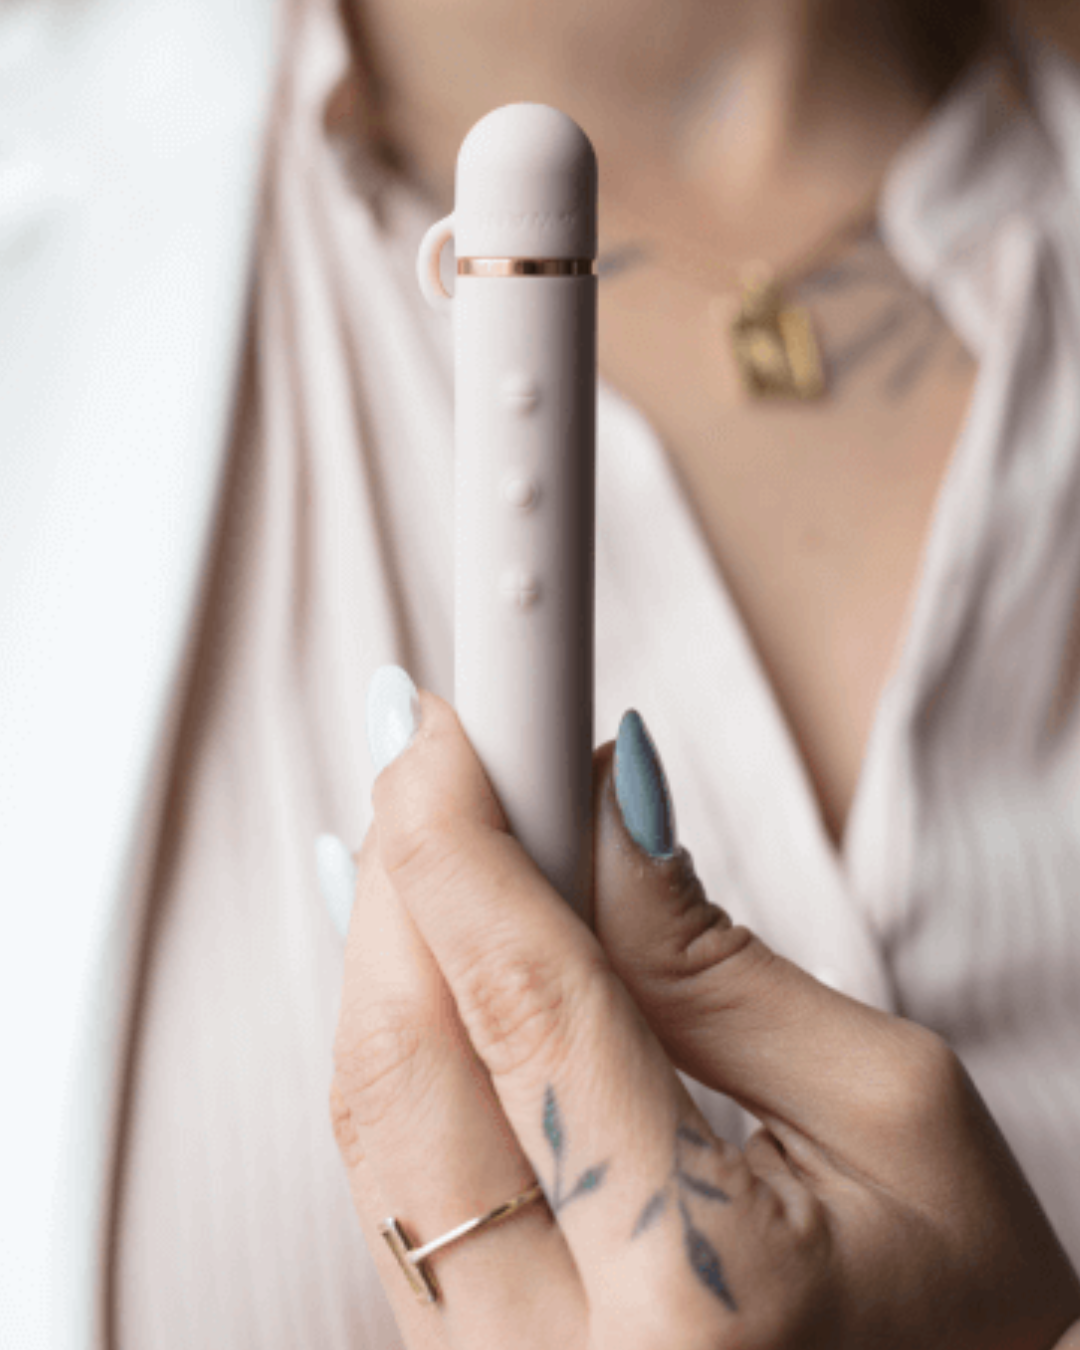 Le Wand Baton Slim Rechargeable Waterproof Vibrator - Rose Gold held in a hand in front of a person's chest